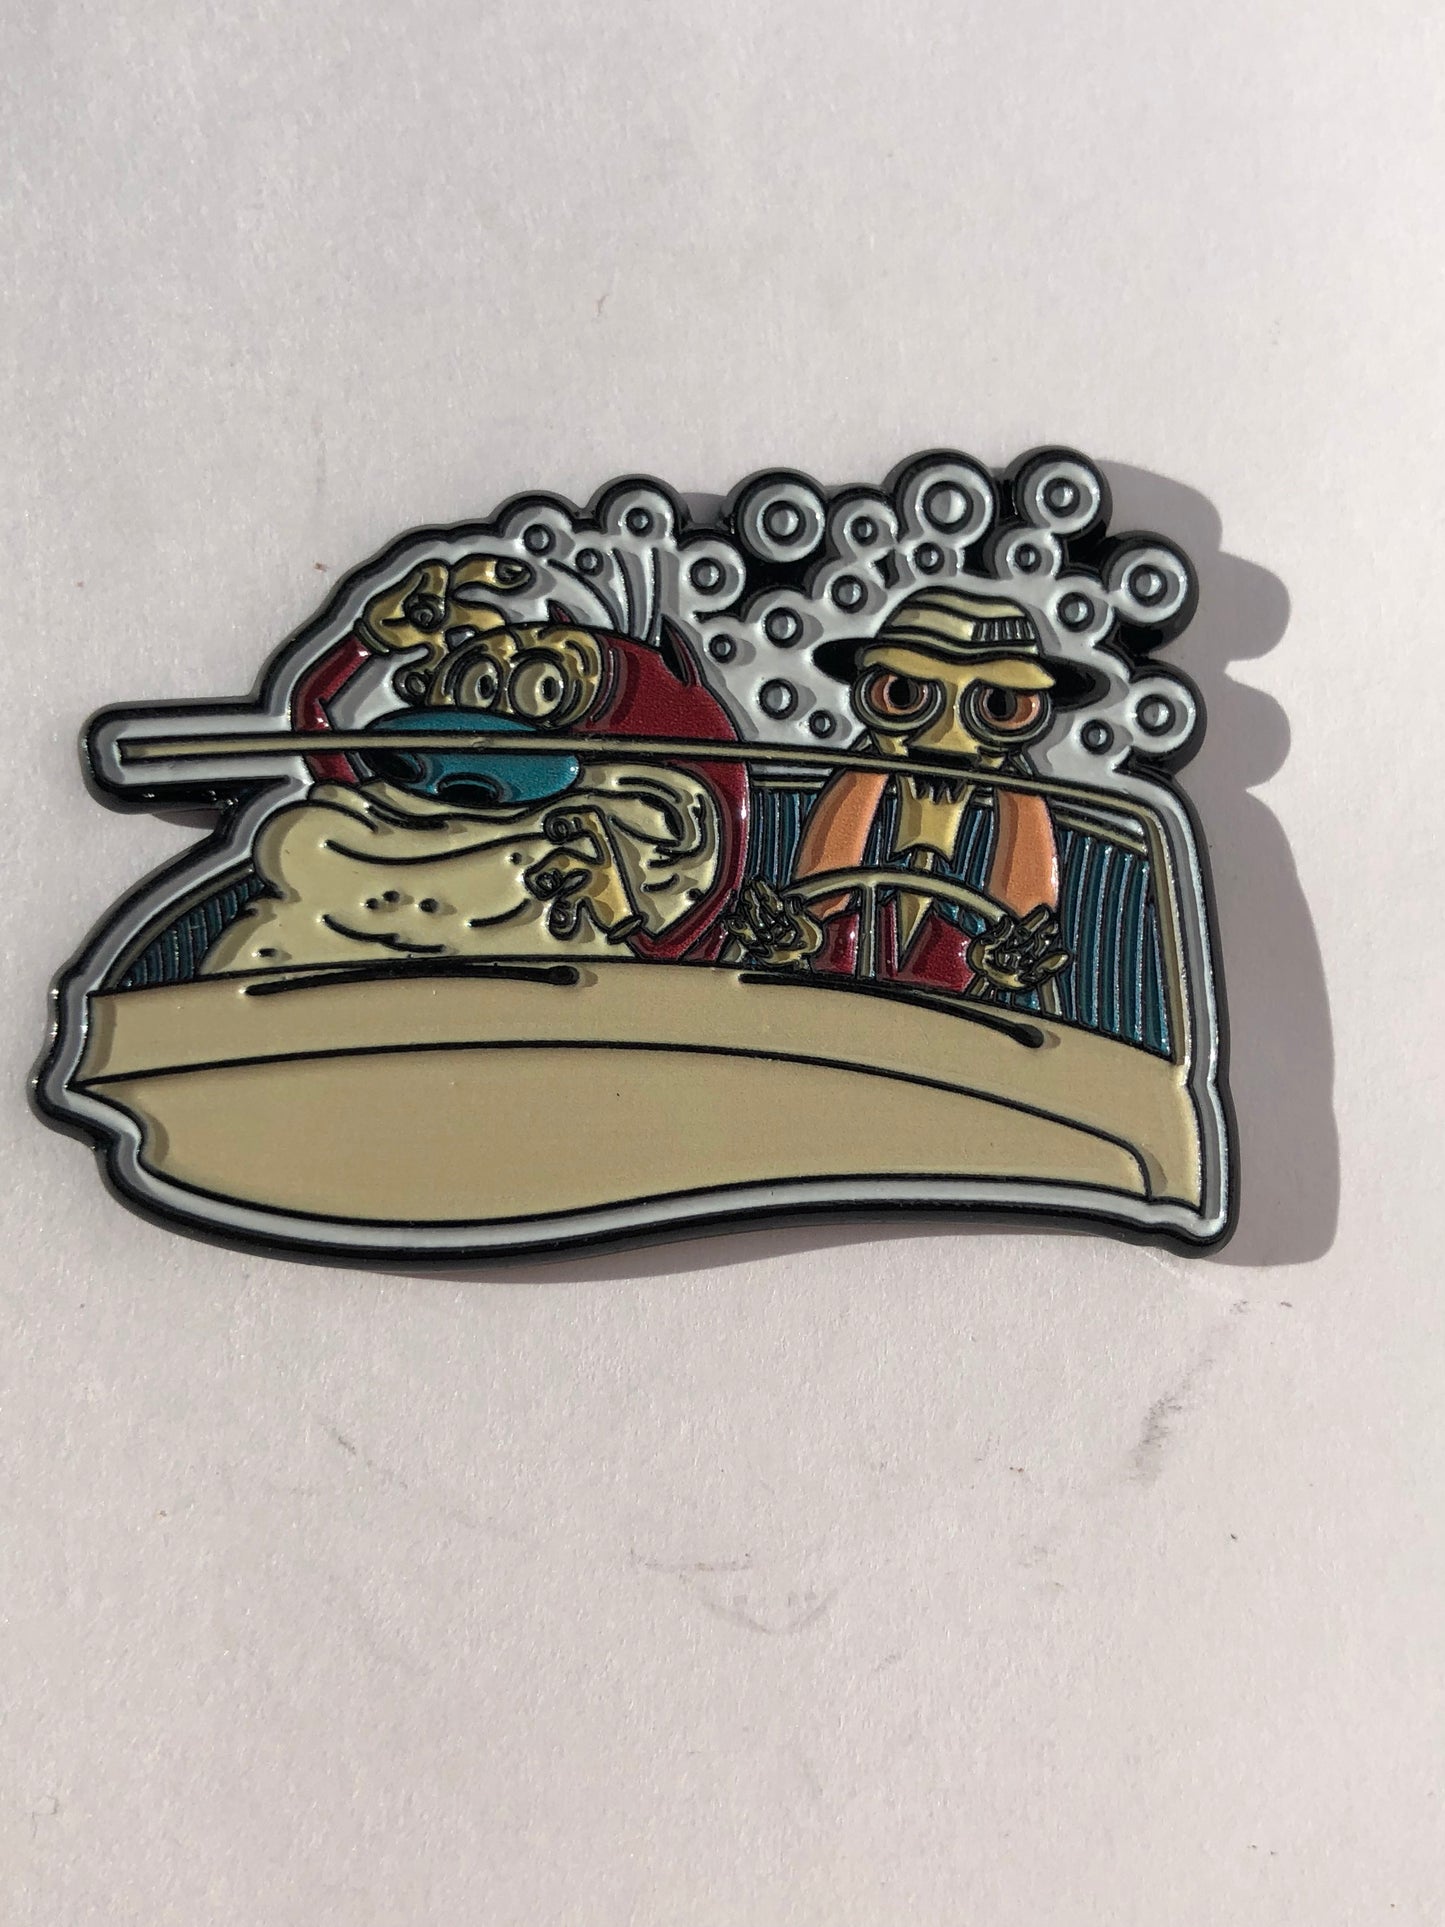 R&S Fear and Loathing Bats Hunter Thompson Pin